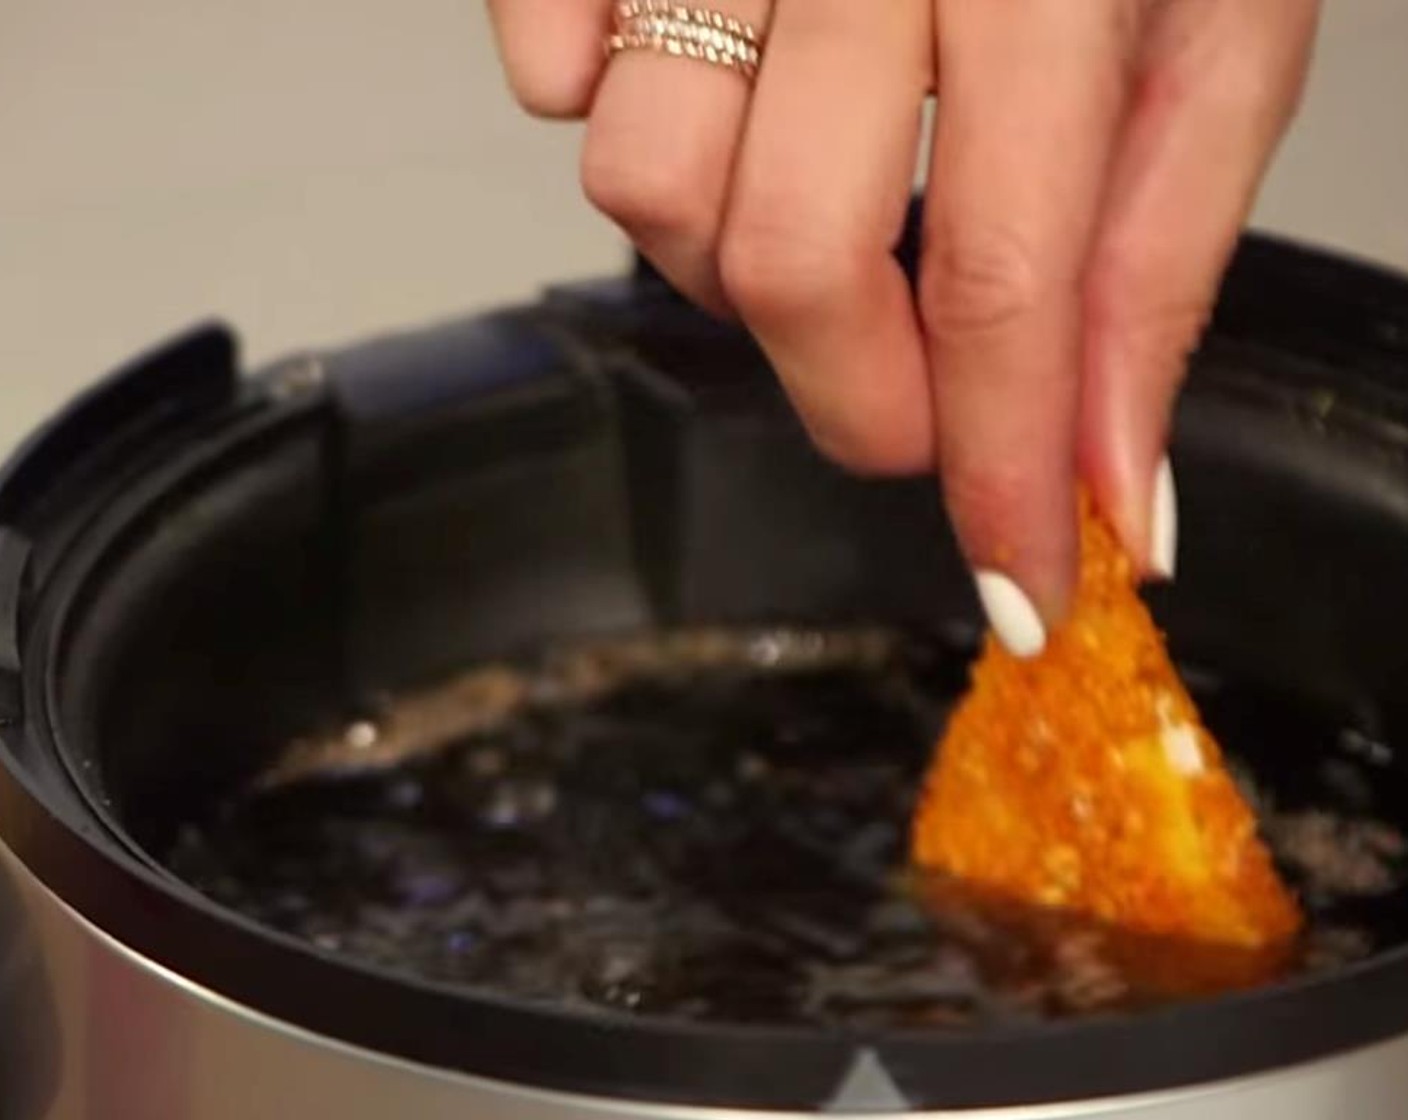 step 6 When ready to serve, heat Vegetable Oil (as needed) in a heavy-bottomed Dutch oven or electric deep fryer to 350 degrees F (180 degrees C). Working in batches, fry the cheese-stuffed Doritos for 1 to 2 minutes, or until the outside is crisp and golden brown.